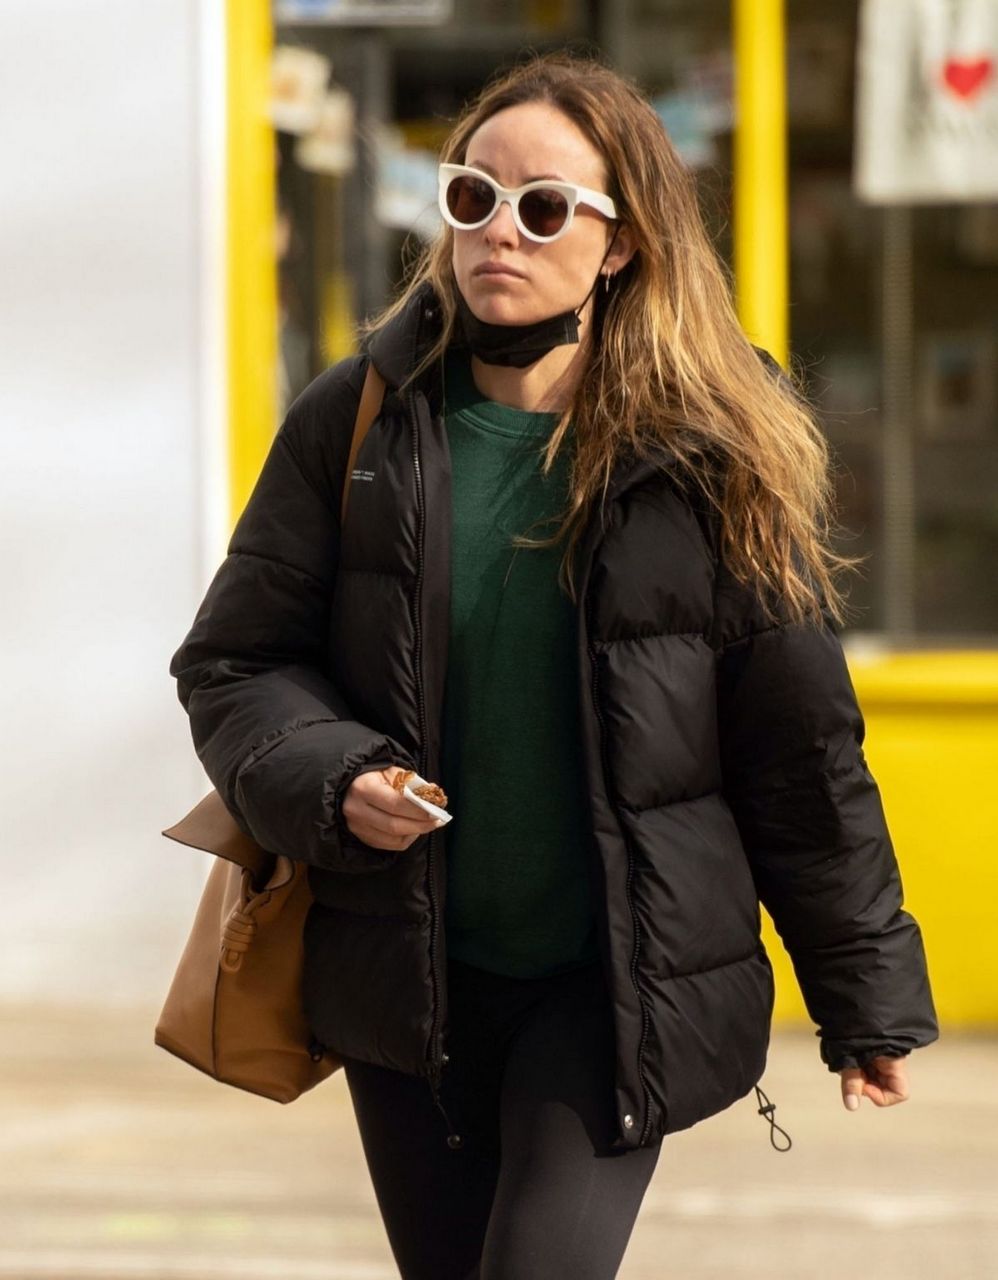 Olivia Wilde Out For Coffee Before Getting Mani Pedi Nail Salon London